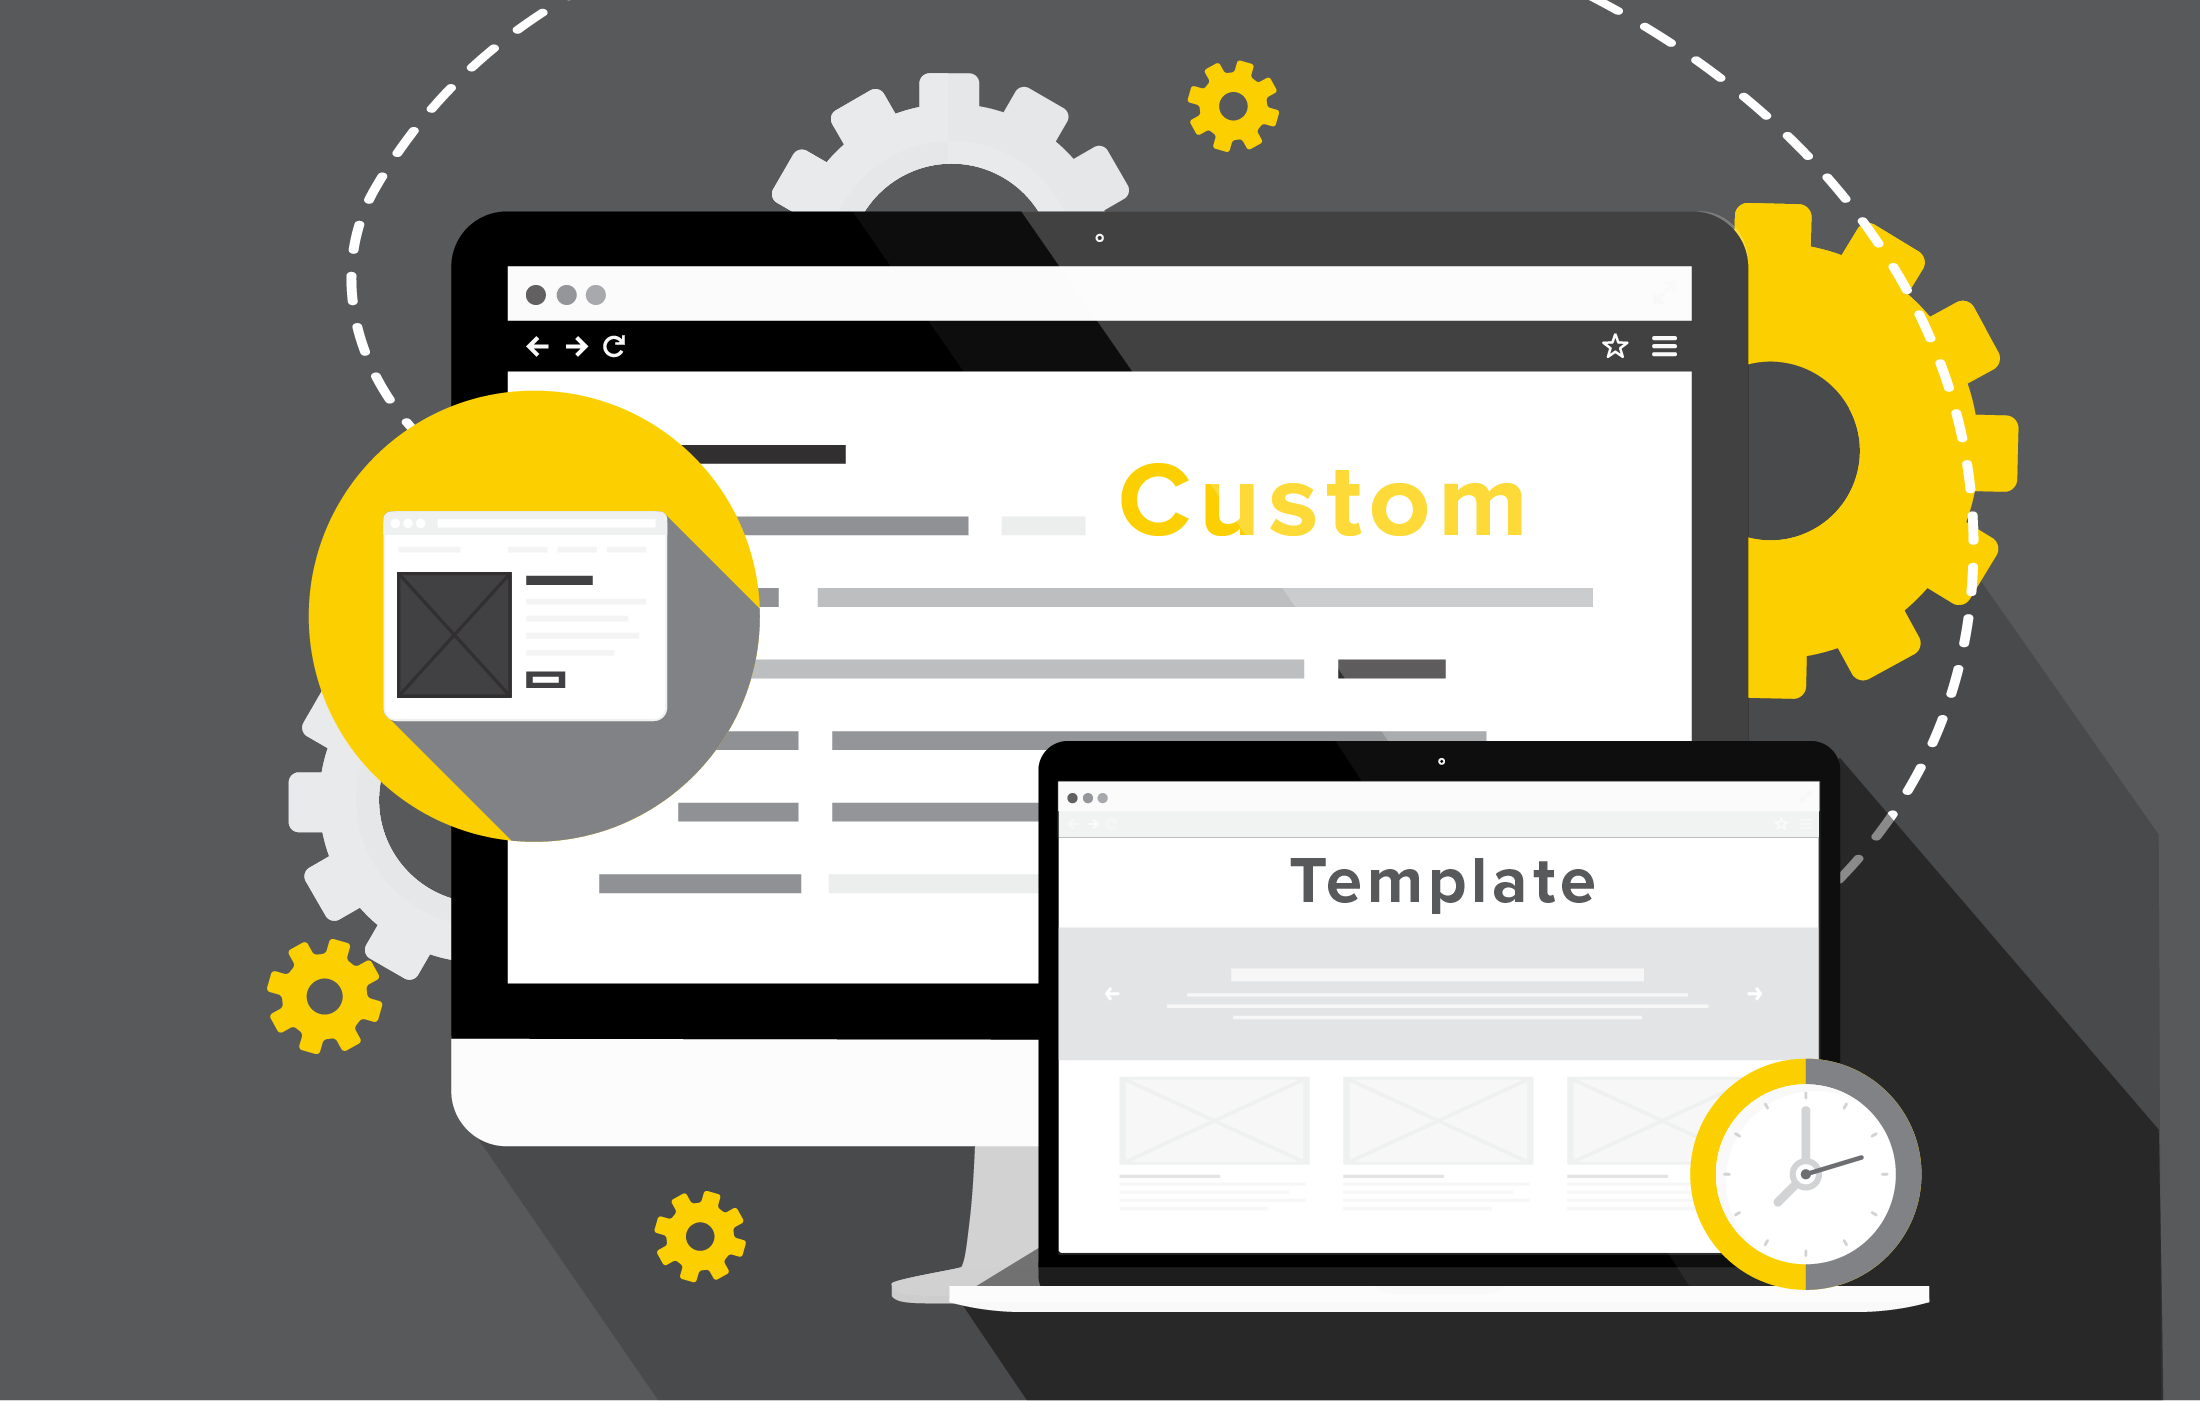 Custom Vs. Templated Websites: What’s The Difference